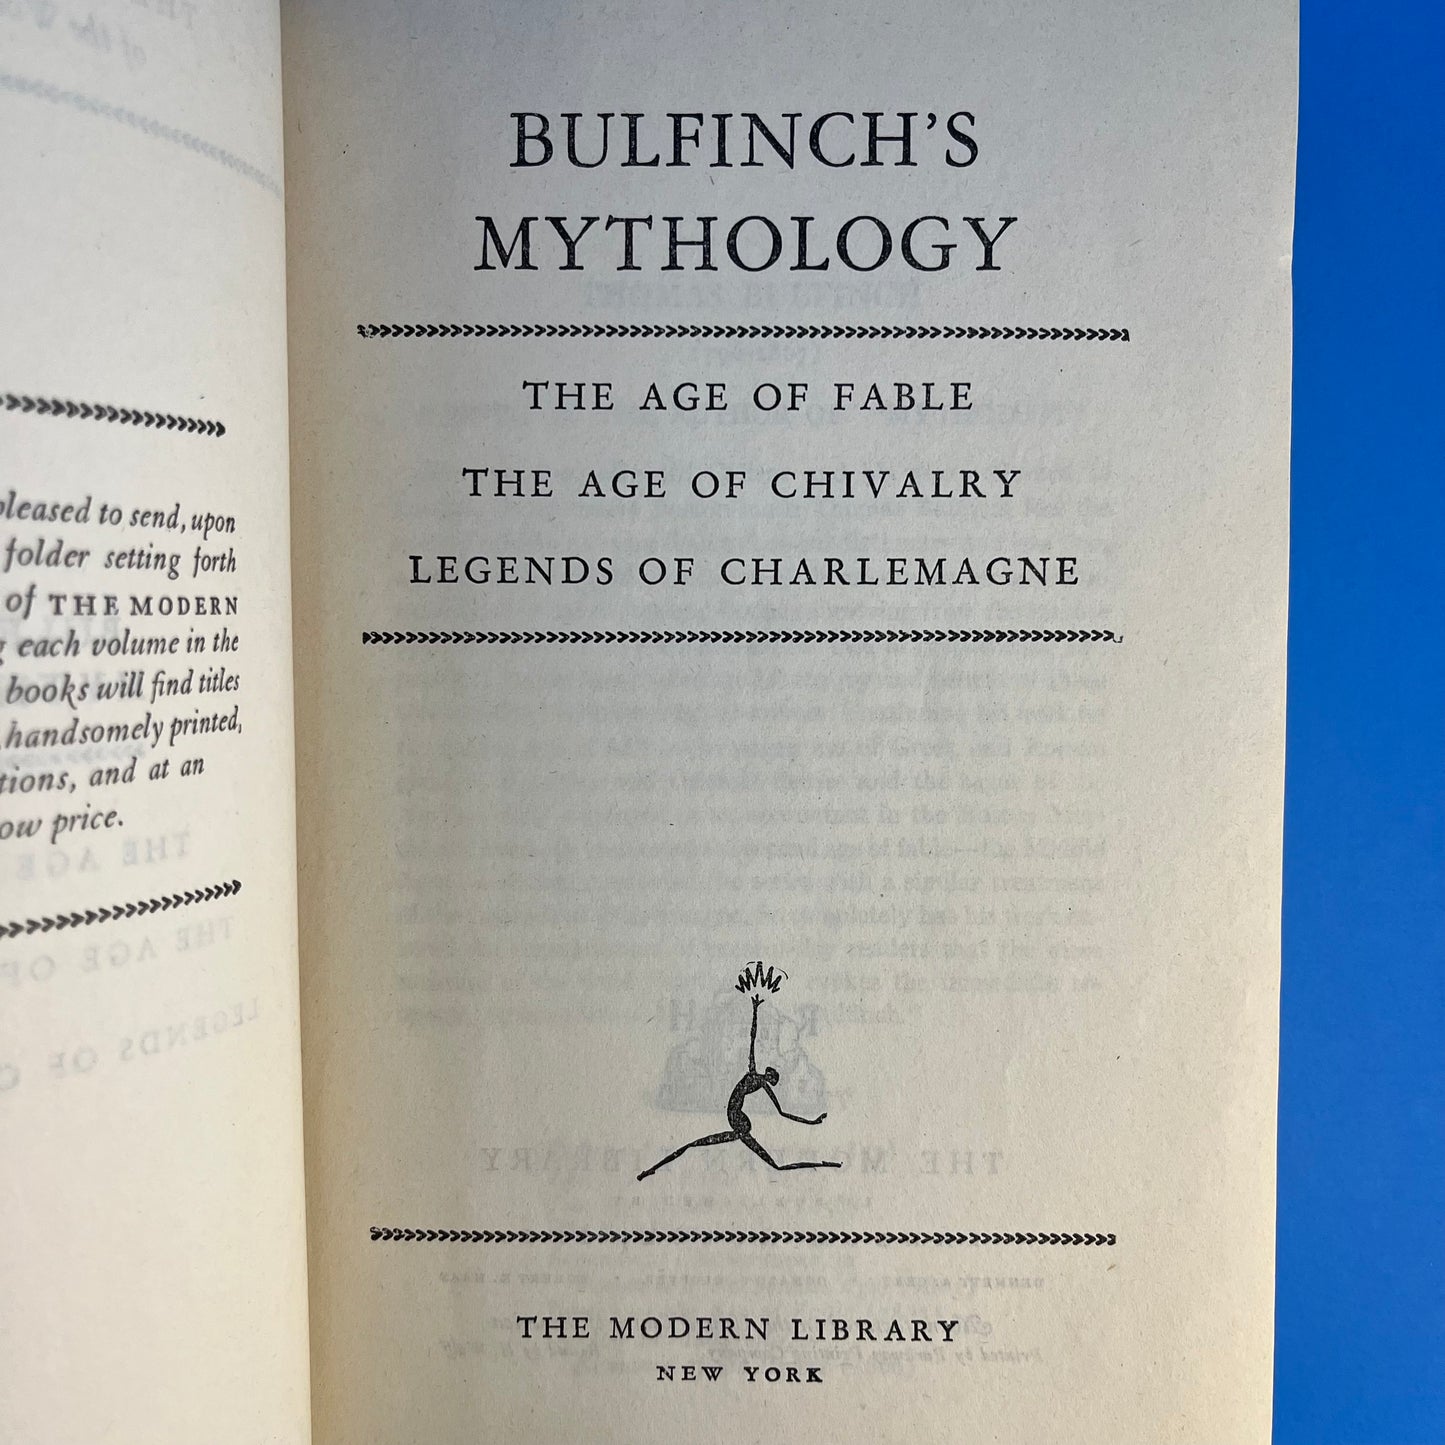 Bulfinch's Mythology: The Age of Fable, The Age of Chivalry, Legends of Charlemagne